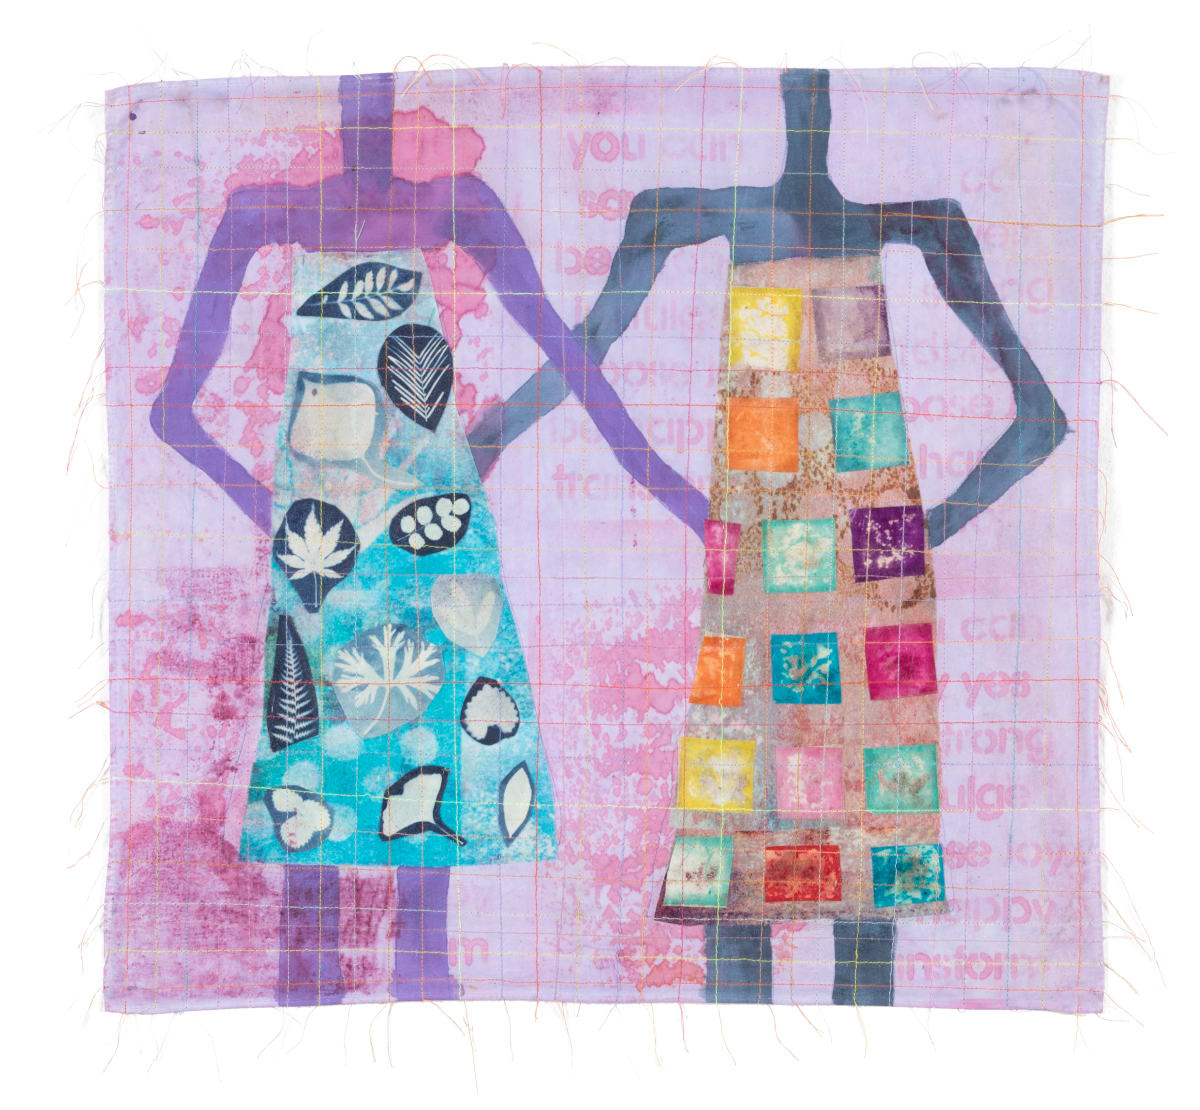 Figurative Cloth Collage 1 by Hollie Heller 